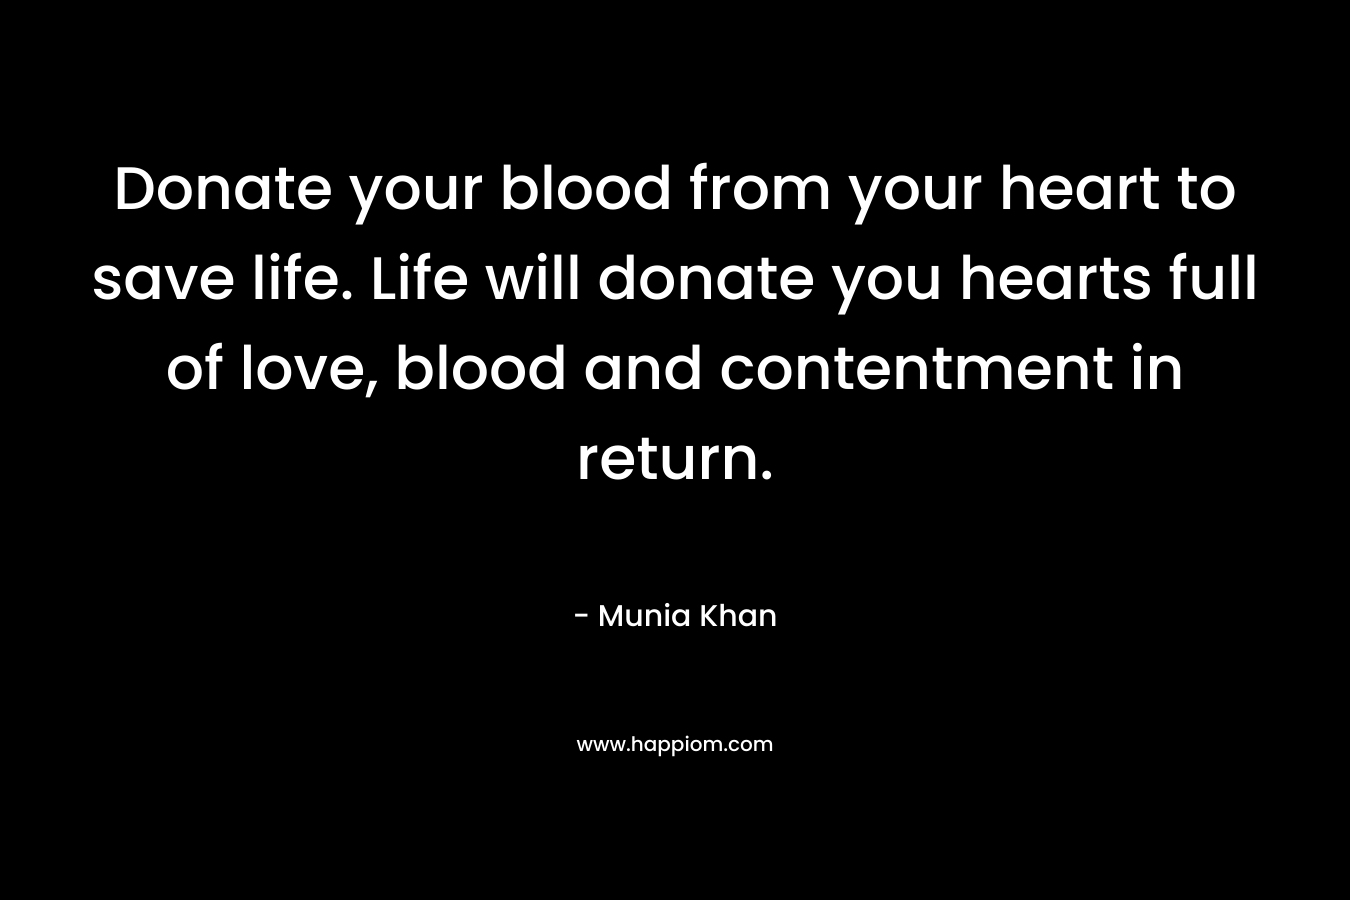 Donate your blood from your heart to save life. Life will donate you hearts full of love, blood and contentment in return.